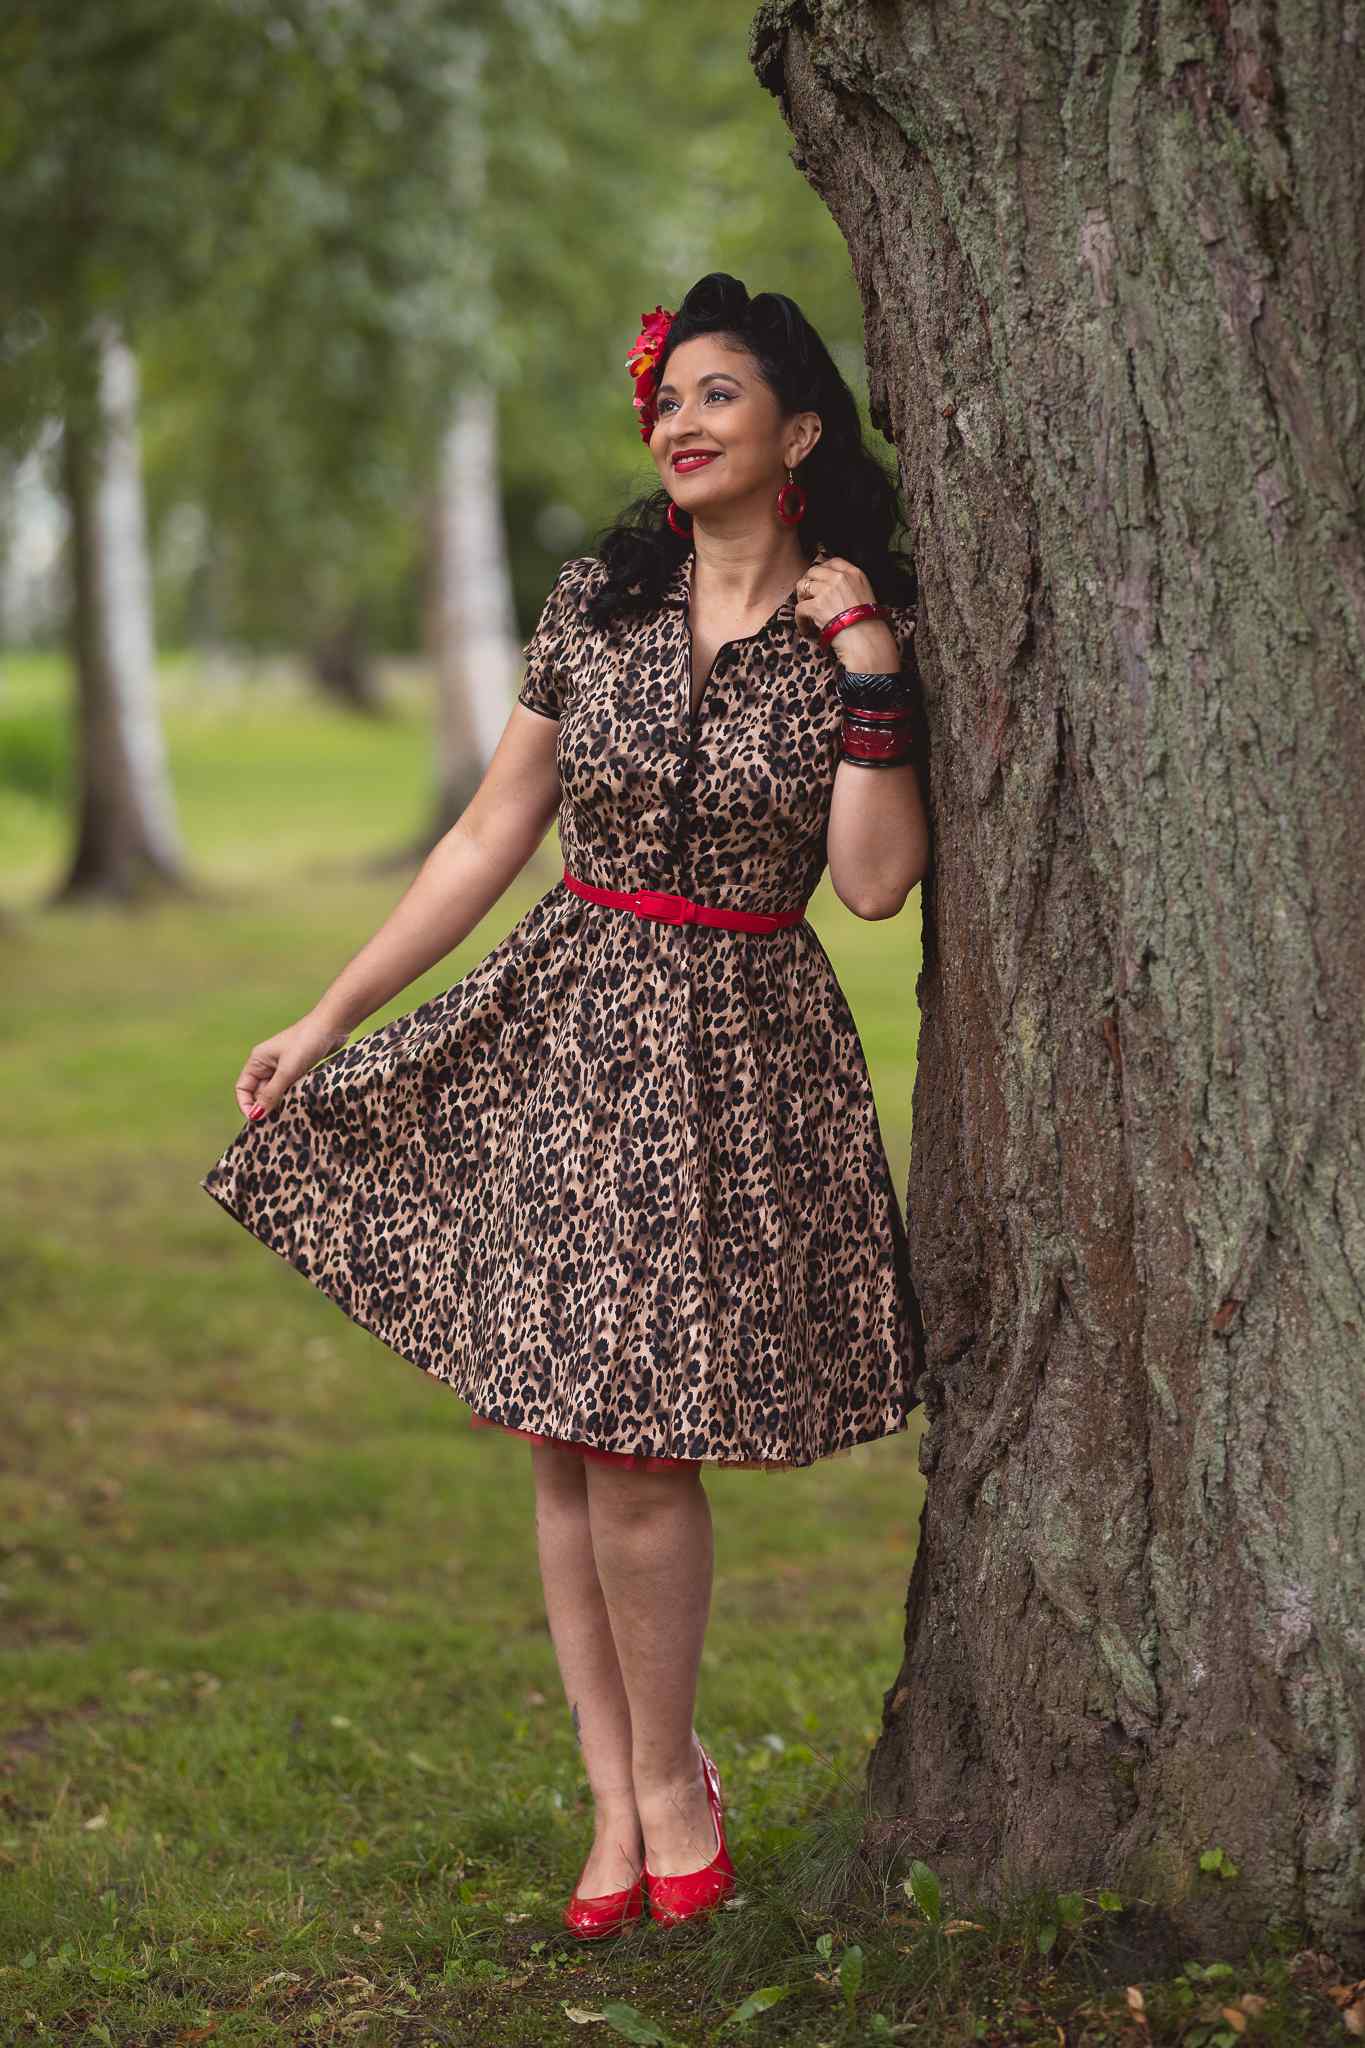 Woman wears our short sleeve Penelope dress, in brown leopard print, in a park, with trees